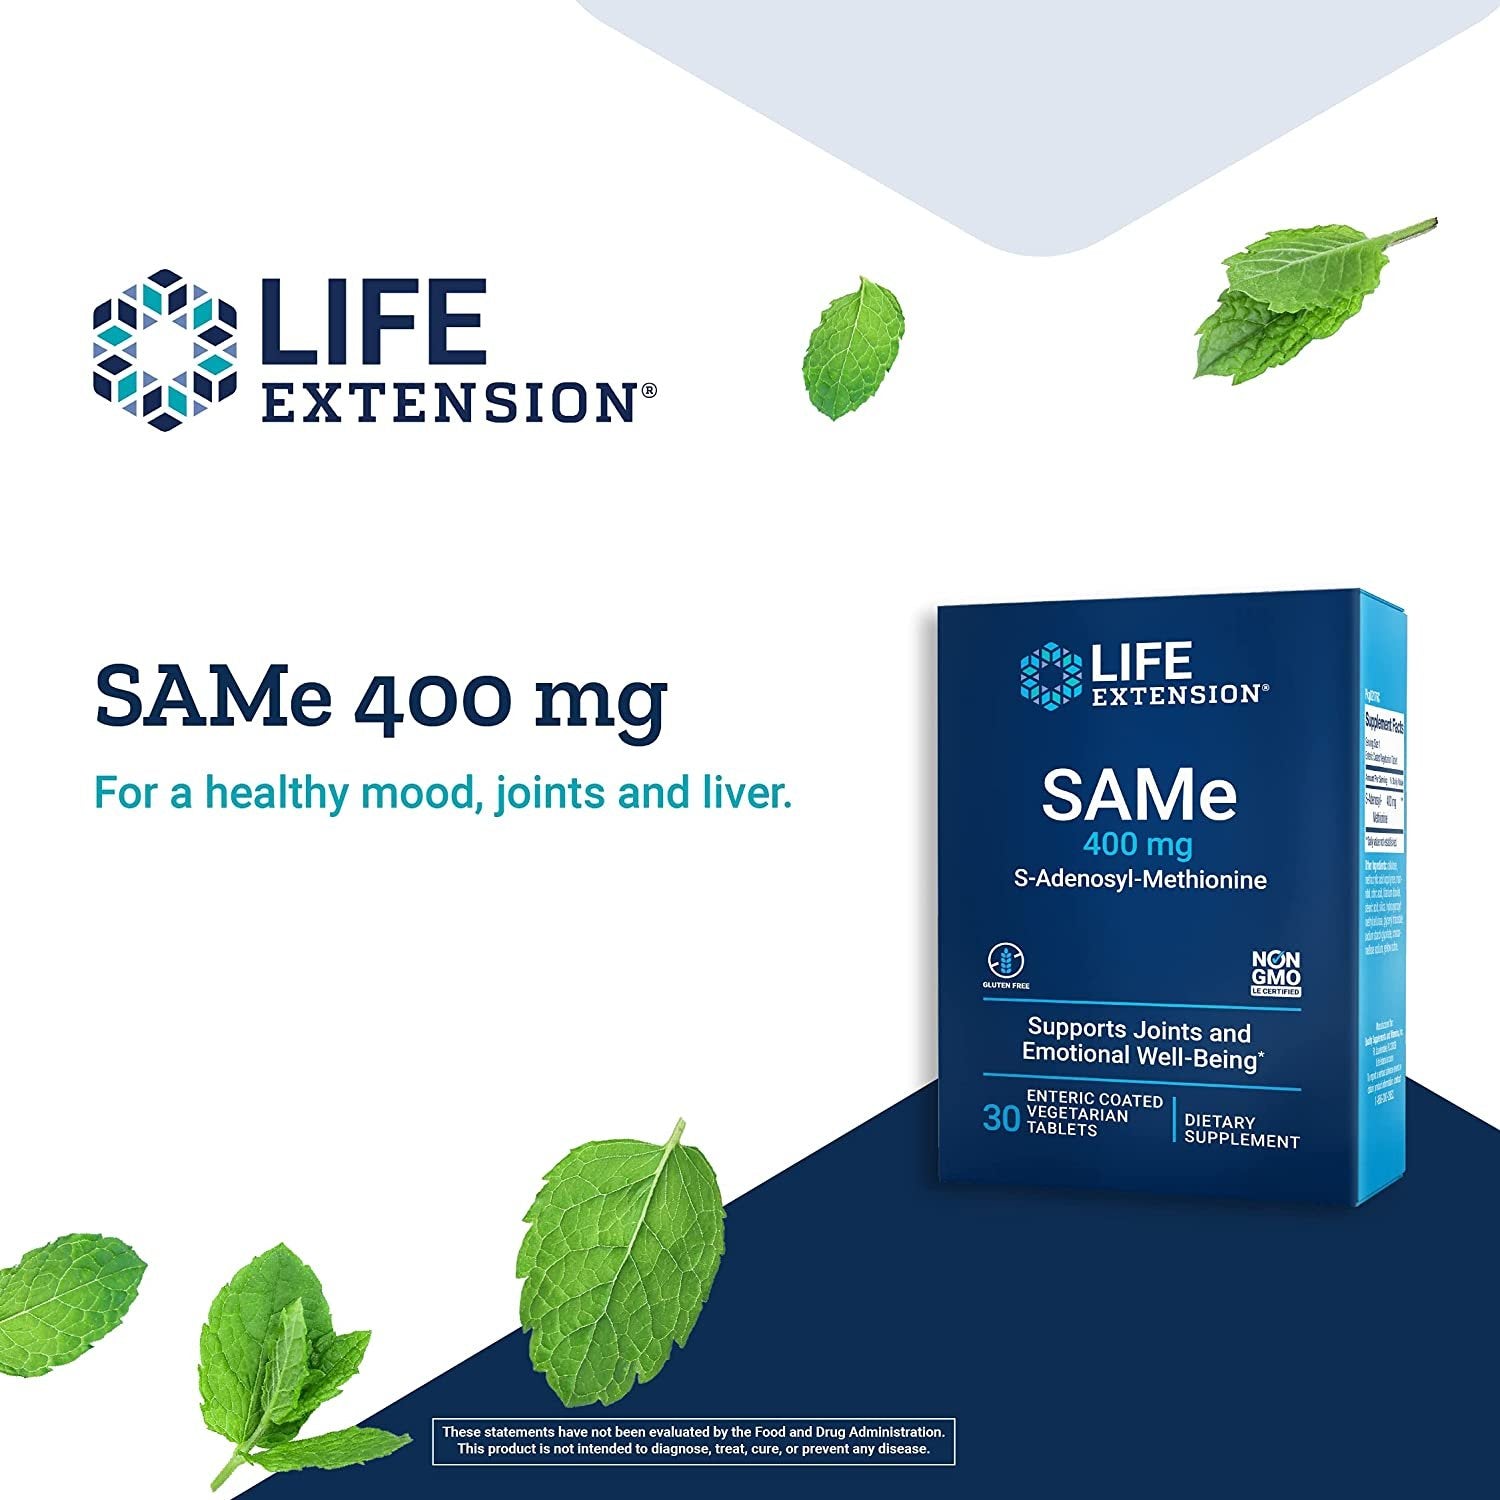 Life Extension Same 400 mg Enteric-Coated S-Adenosyl-Methionine Mood Support, Liver Health & Healthy Joint Function Support Supplement - Non-GMO, Gluten Free - 30 Enteric-Coated Vegetarian Tablets